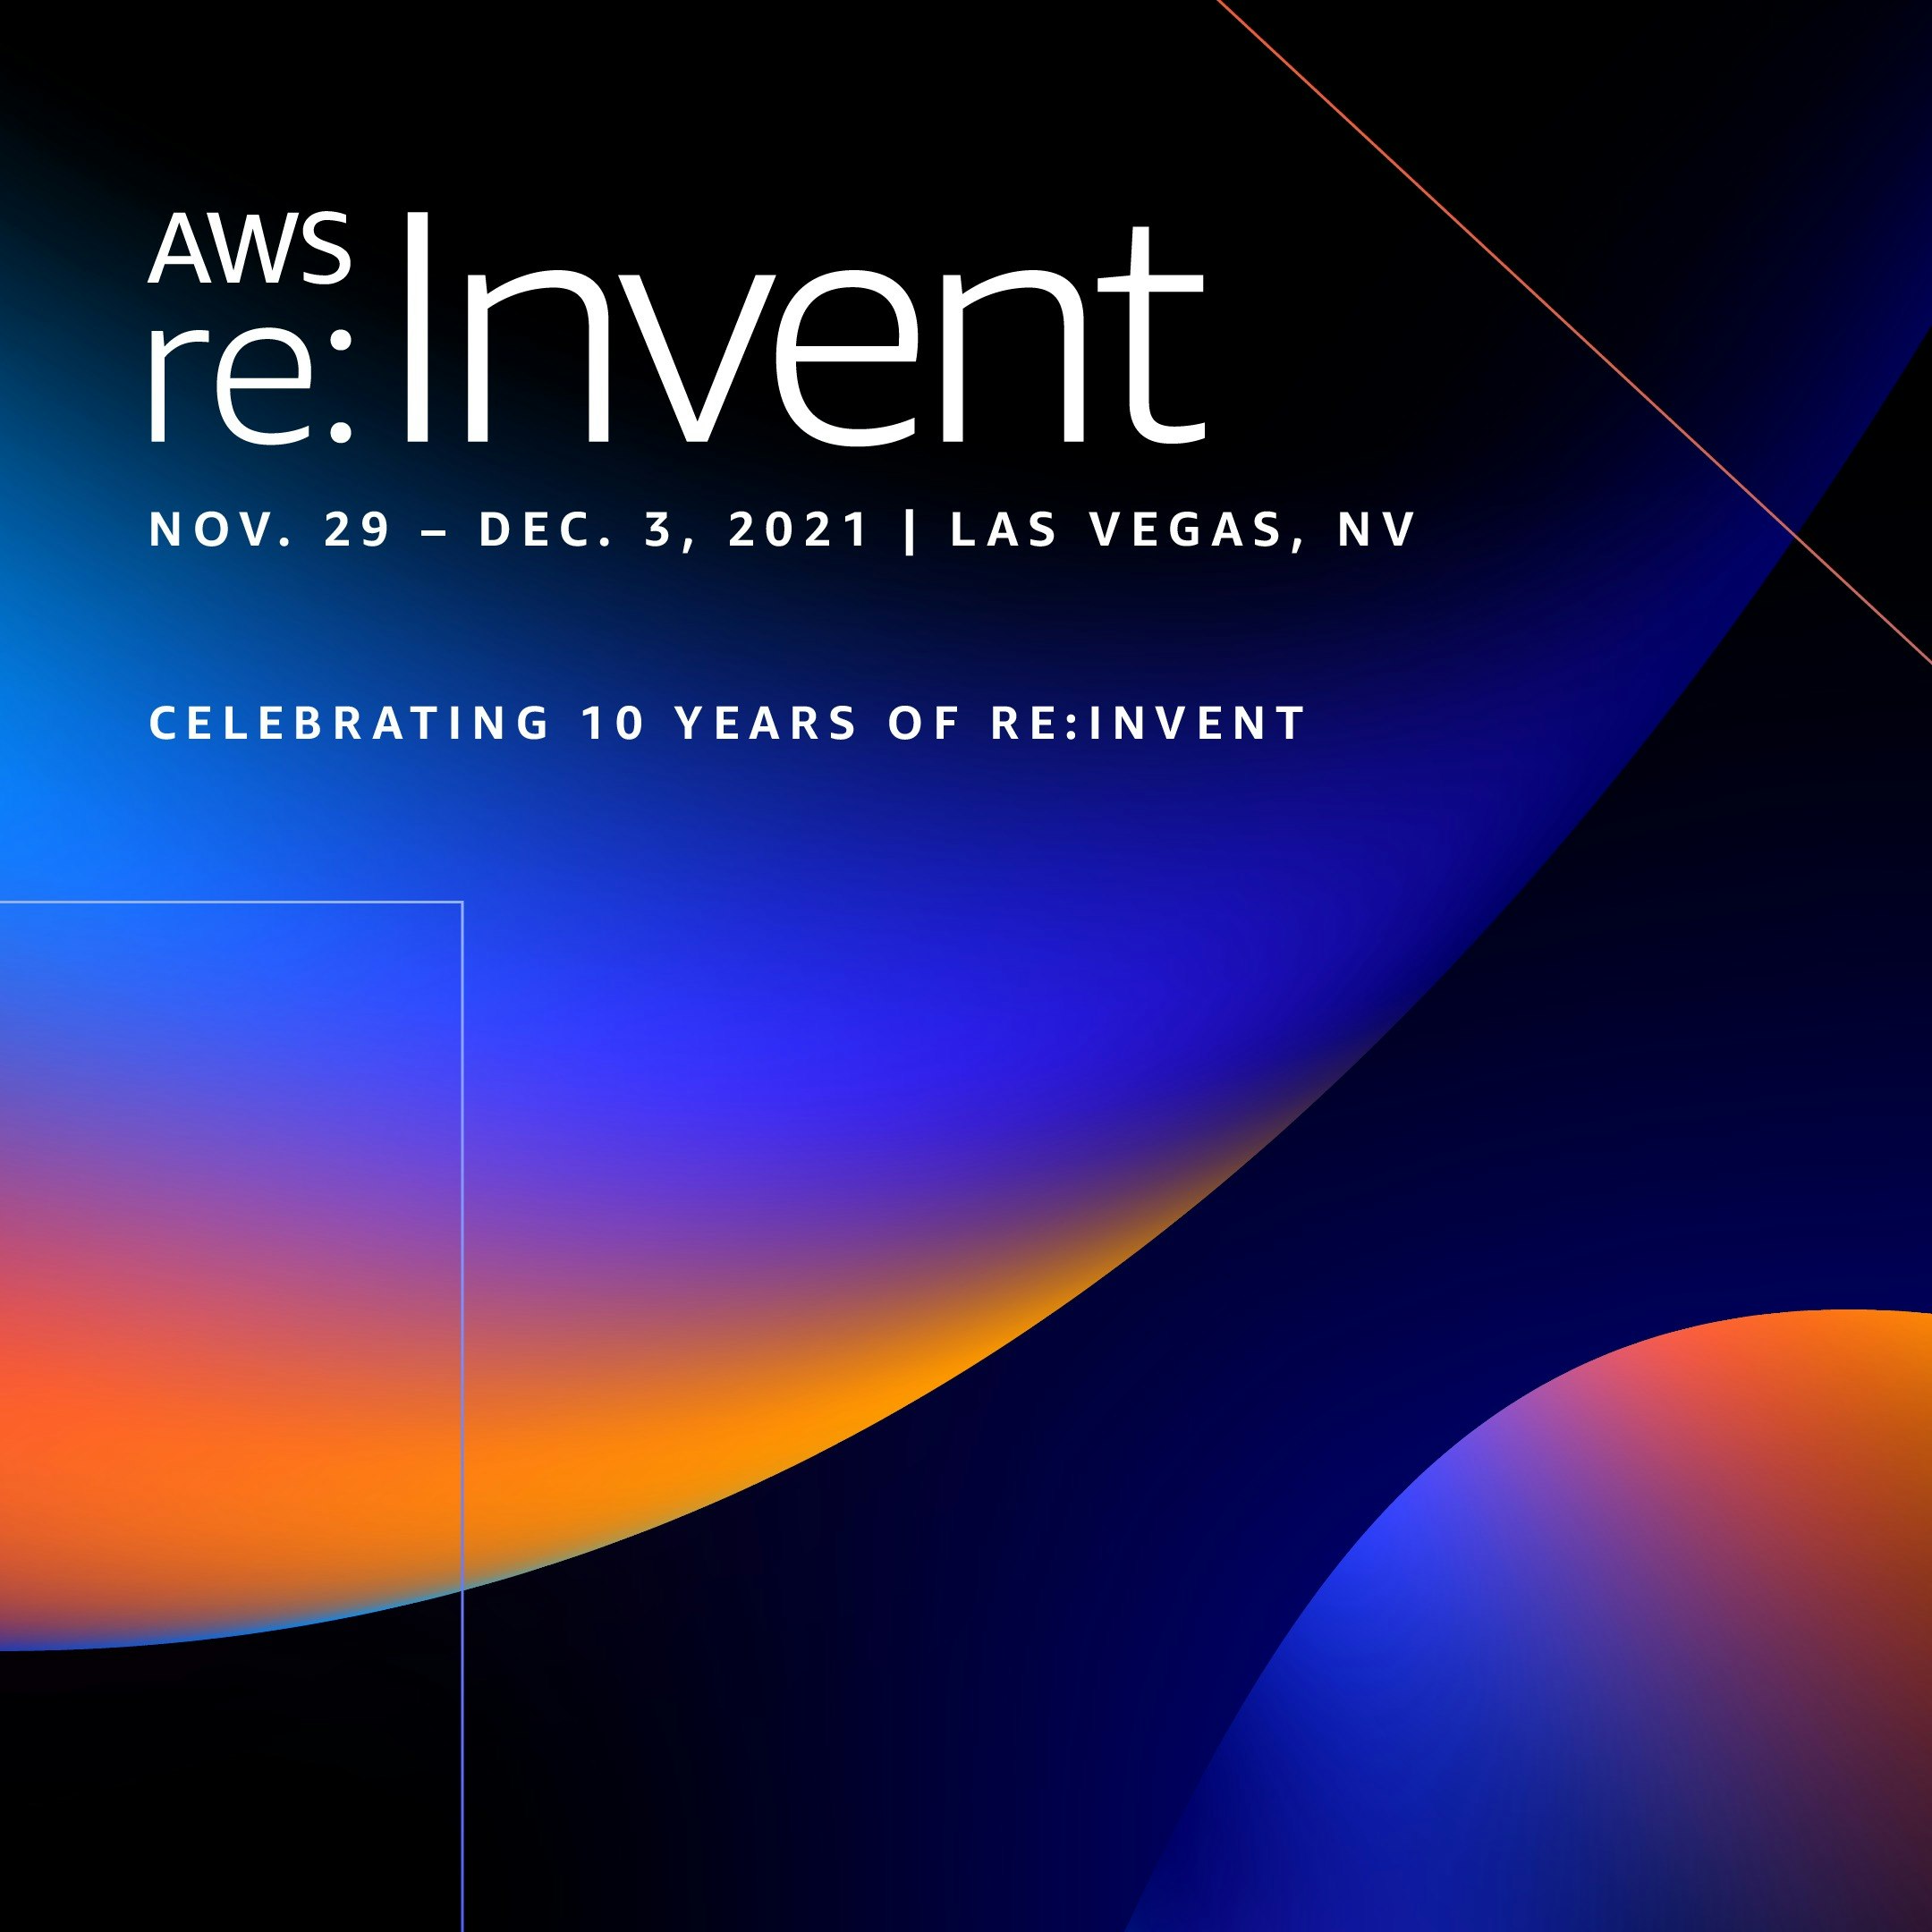 Logo image of AWS re:Invent